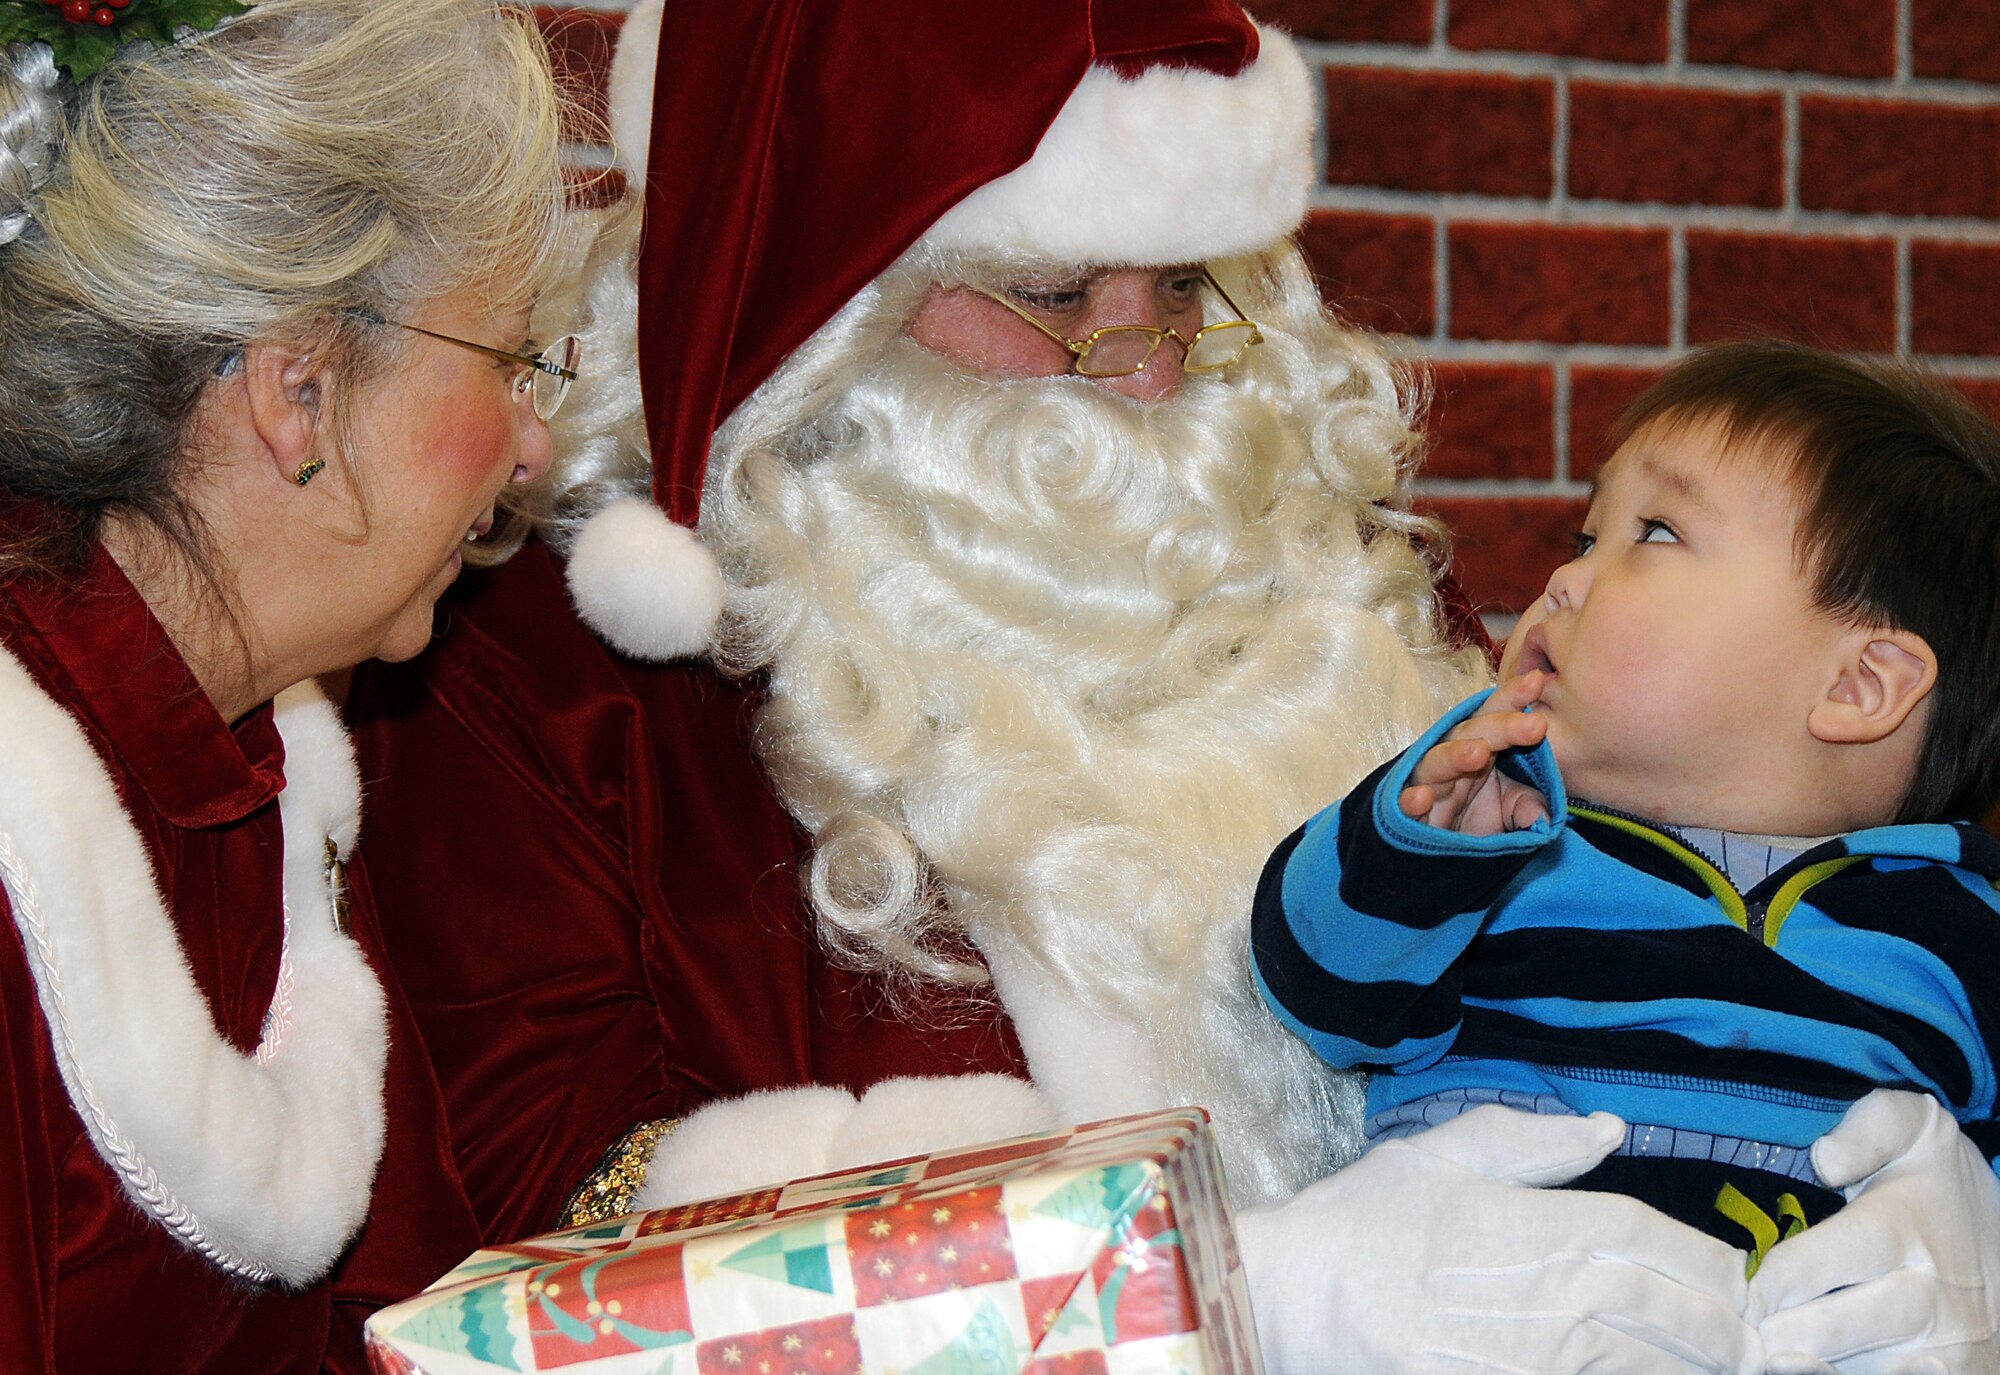 St. George resident Till Lekanof, age 1, gets some personal attention from Santa and Mrs. Santa during an Operation Santa Claus mission on Nov. 7, 2009. U.S. Air Force photo by 1st Lt. John Callahan.